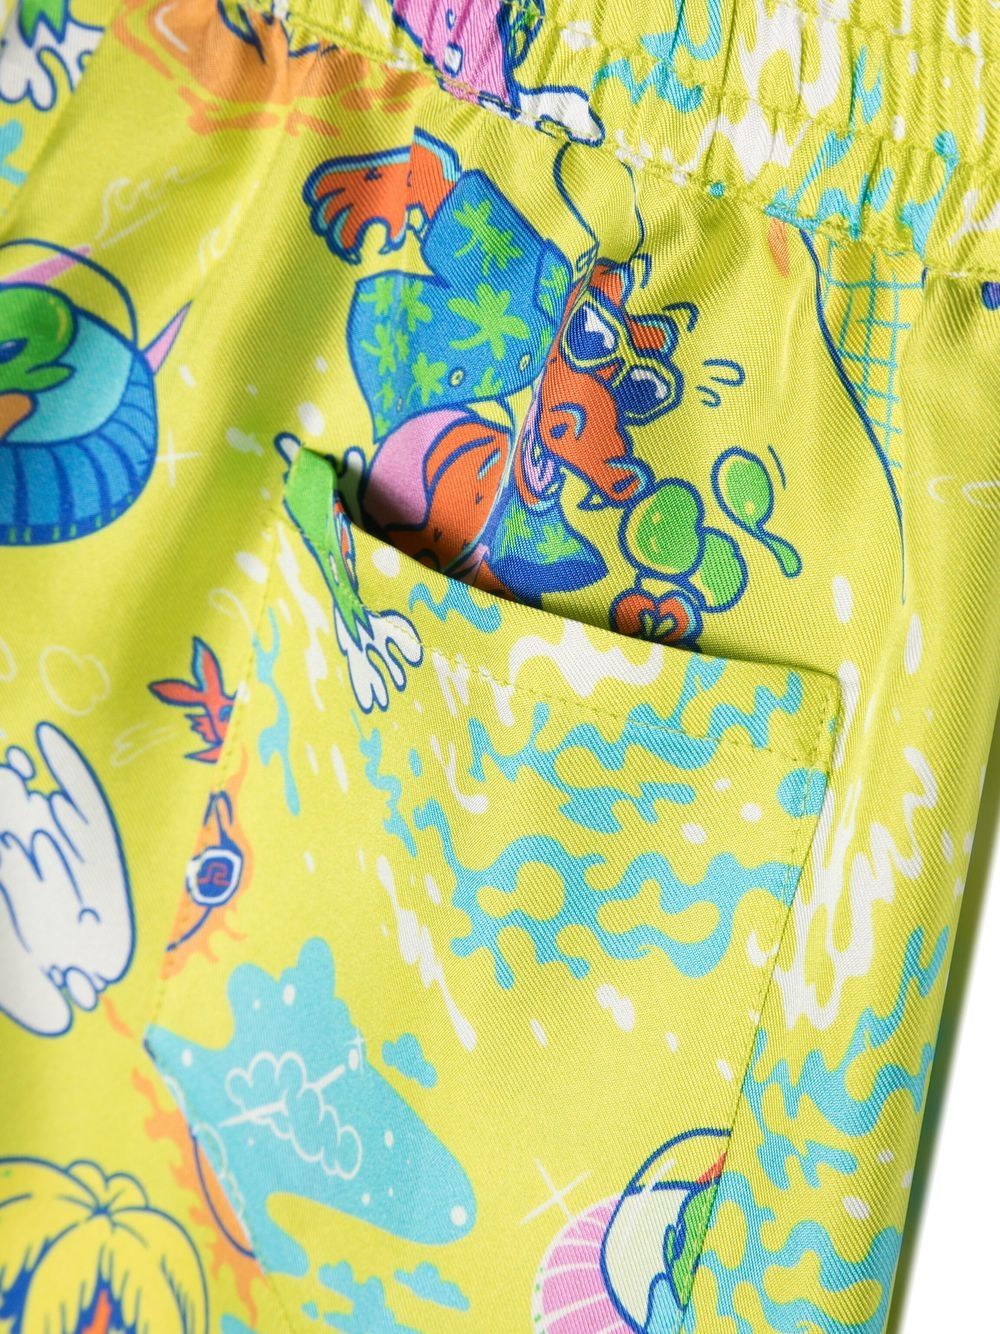 Silk shorts with graphic print